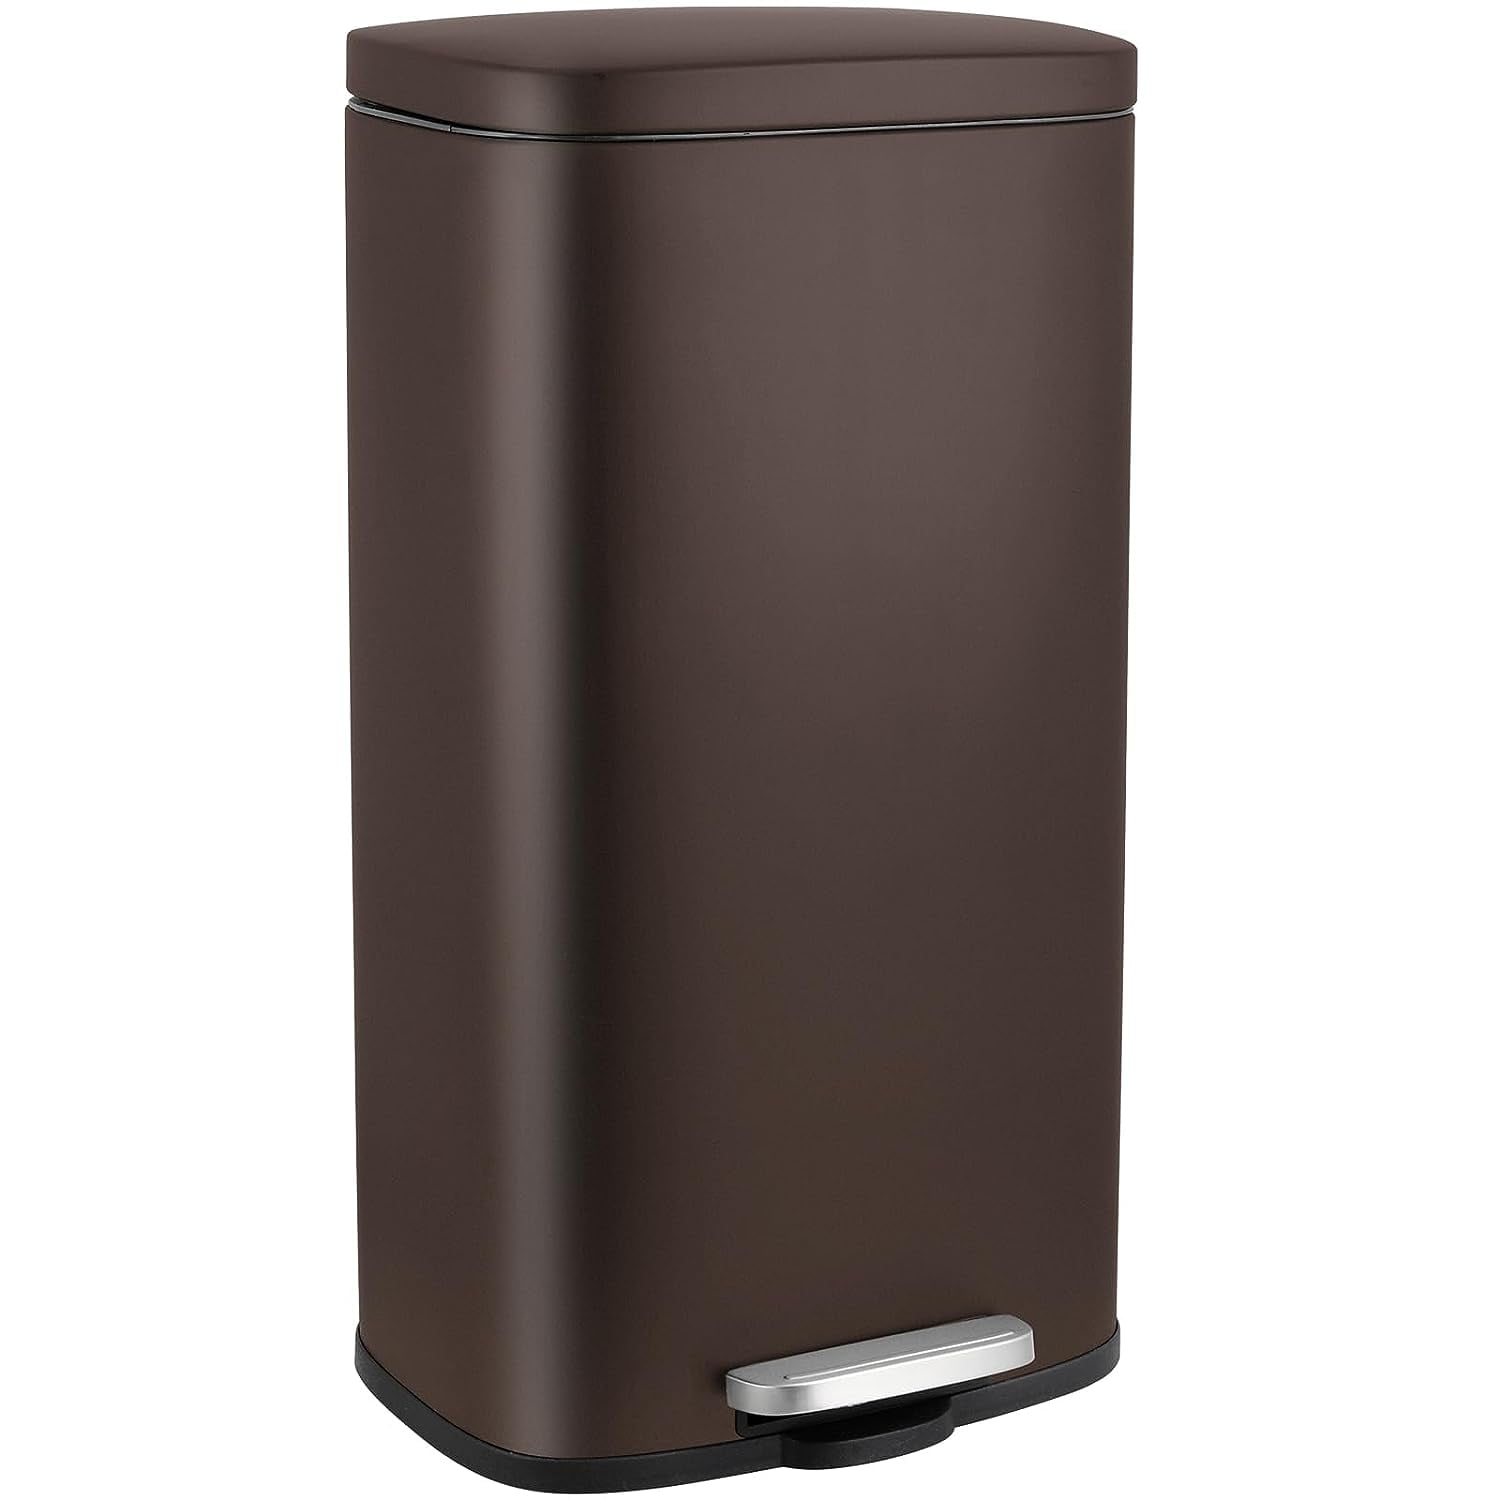 LAZY BUDDY 30 Liter 8 Gallon Trash Can with Foot Pedal, Stainless